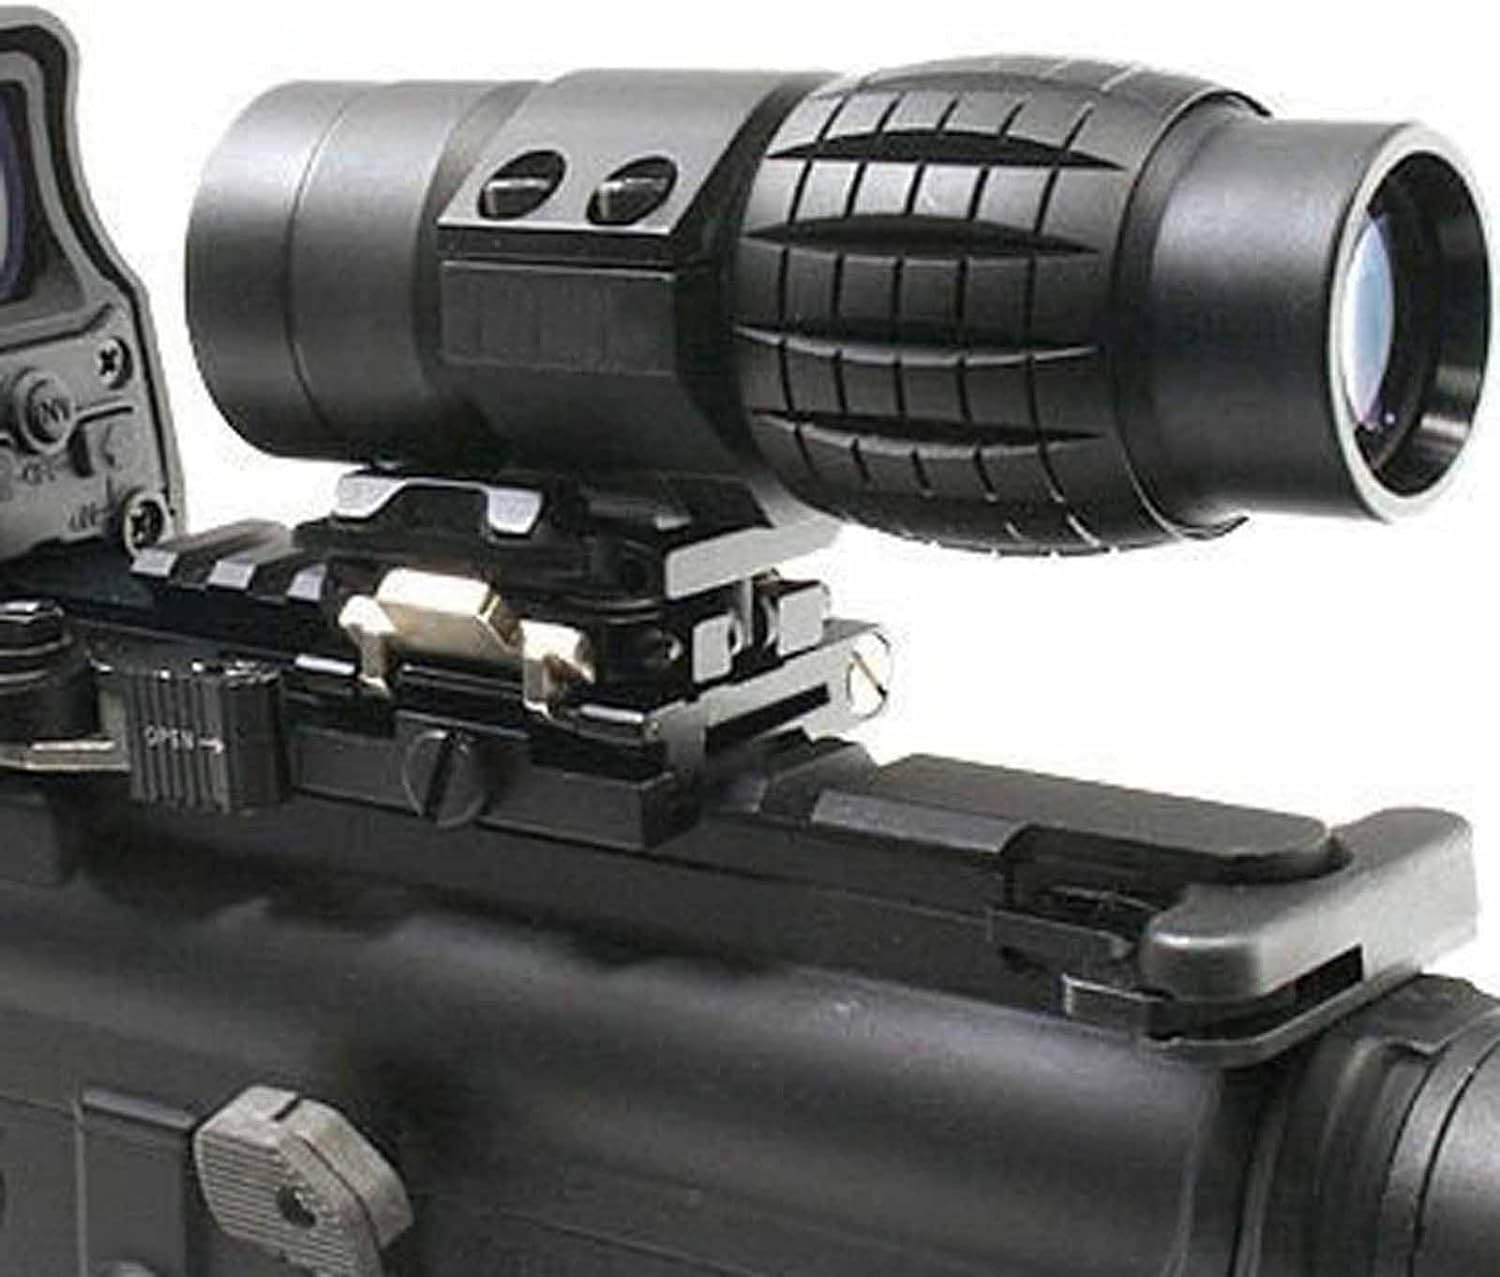 TRIMEX MAGNIFIER SCOPE X3 WITH FLIP-UP MOUNT